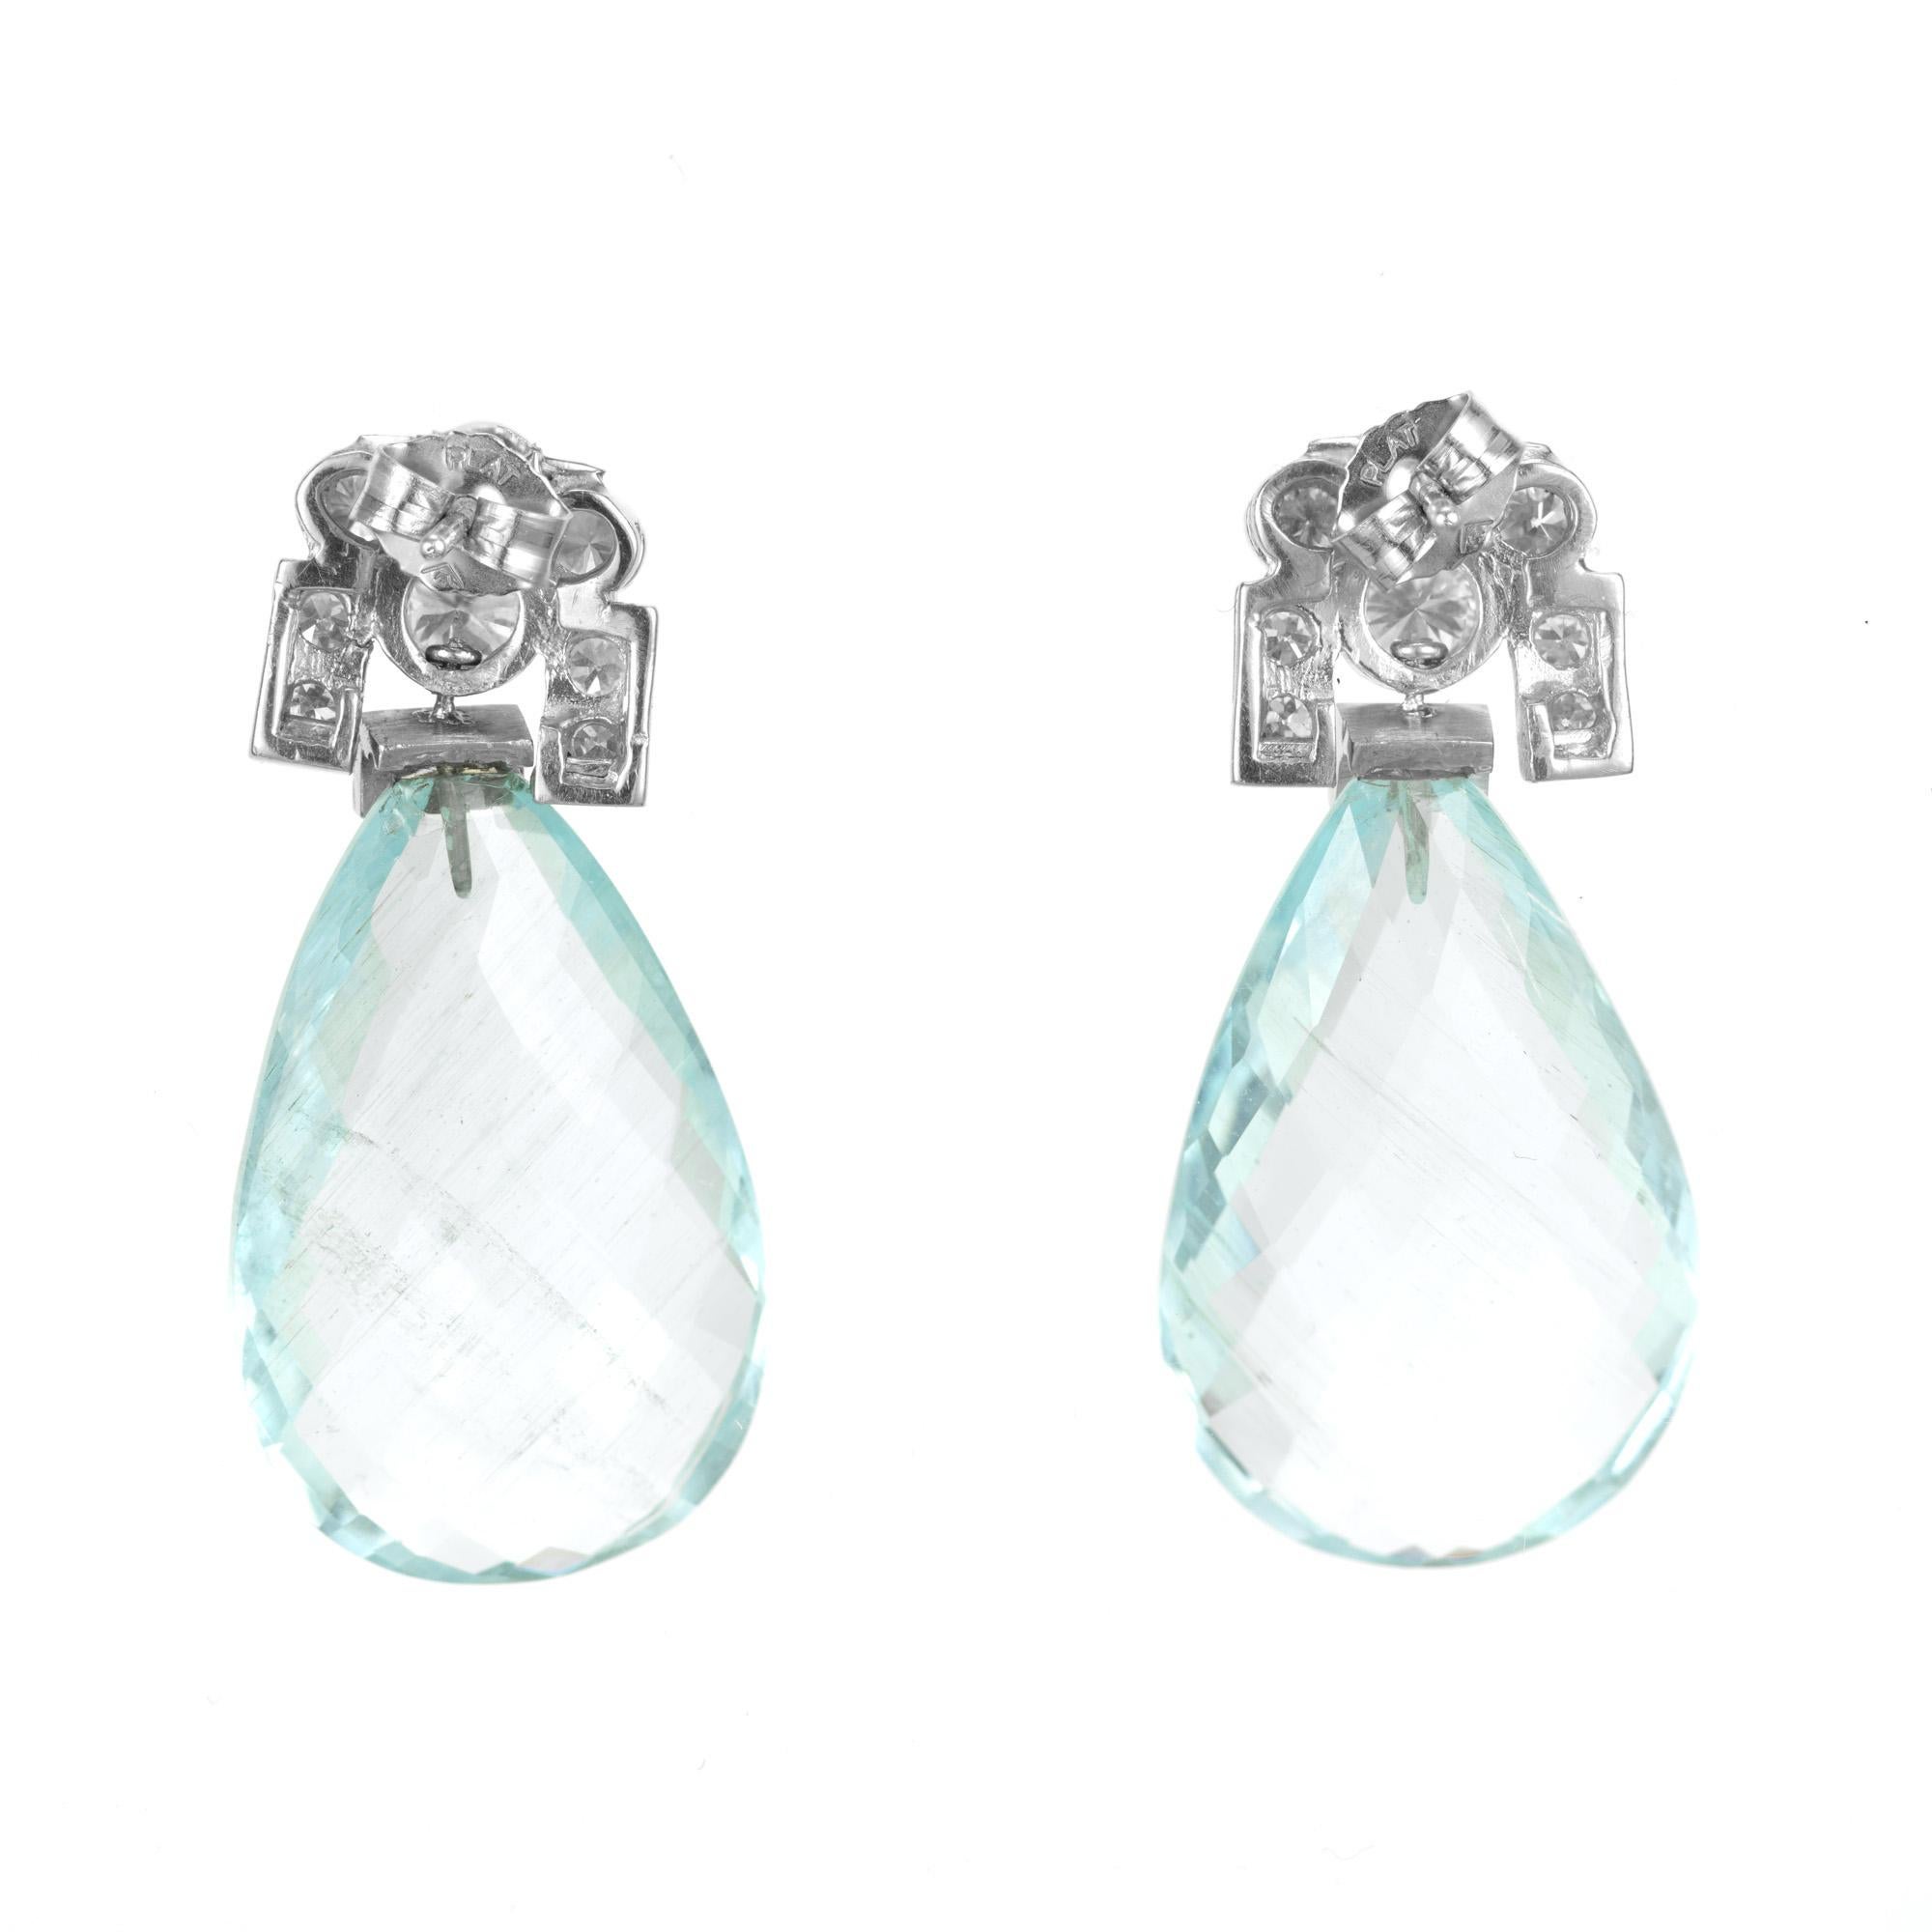 Beautiful briolette and diamond dangle earrings. Two large pear shape natural, untreated aquamarines totaling 27.00cts, with platinum tops that are adorned with bezel set round and emerald cut diamonds. Their mesmerizing aqua hue captures attention